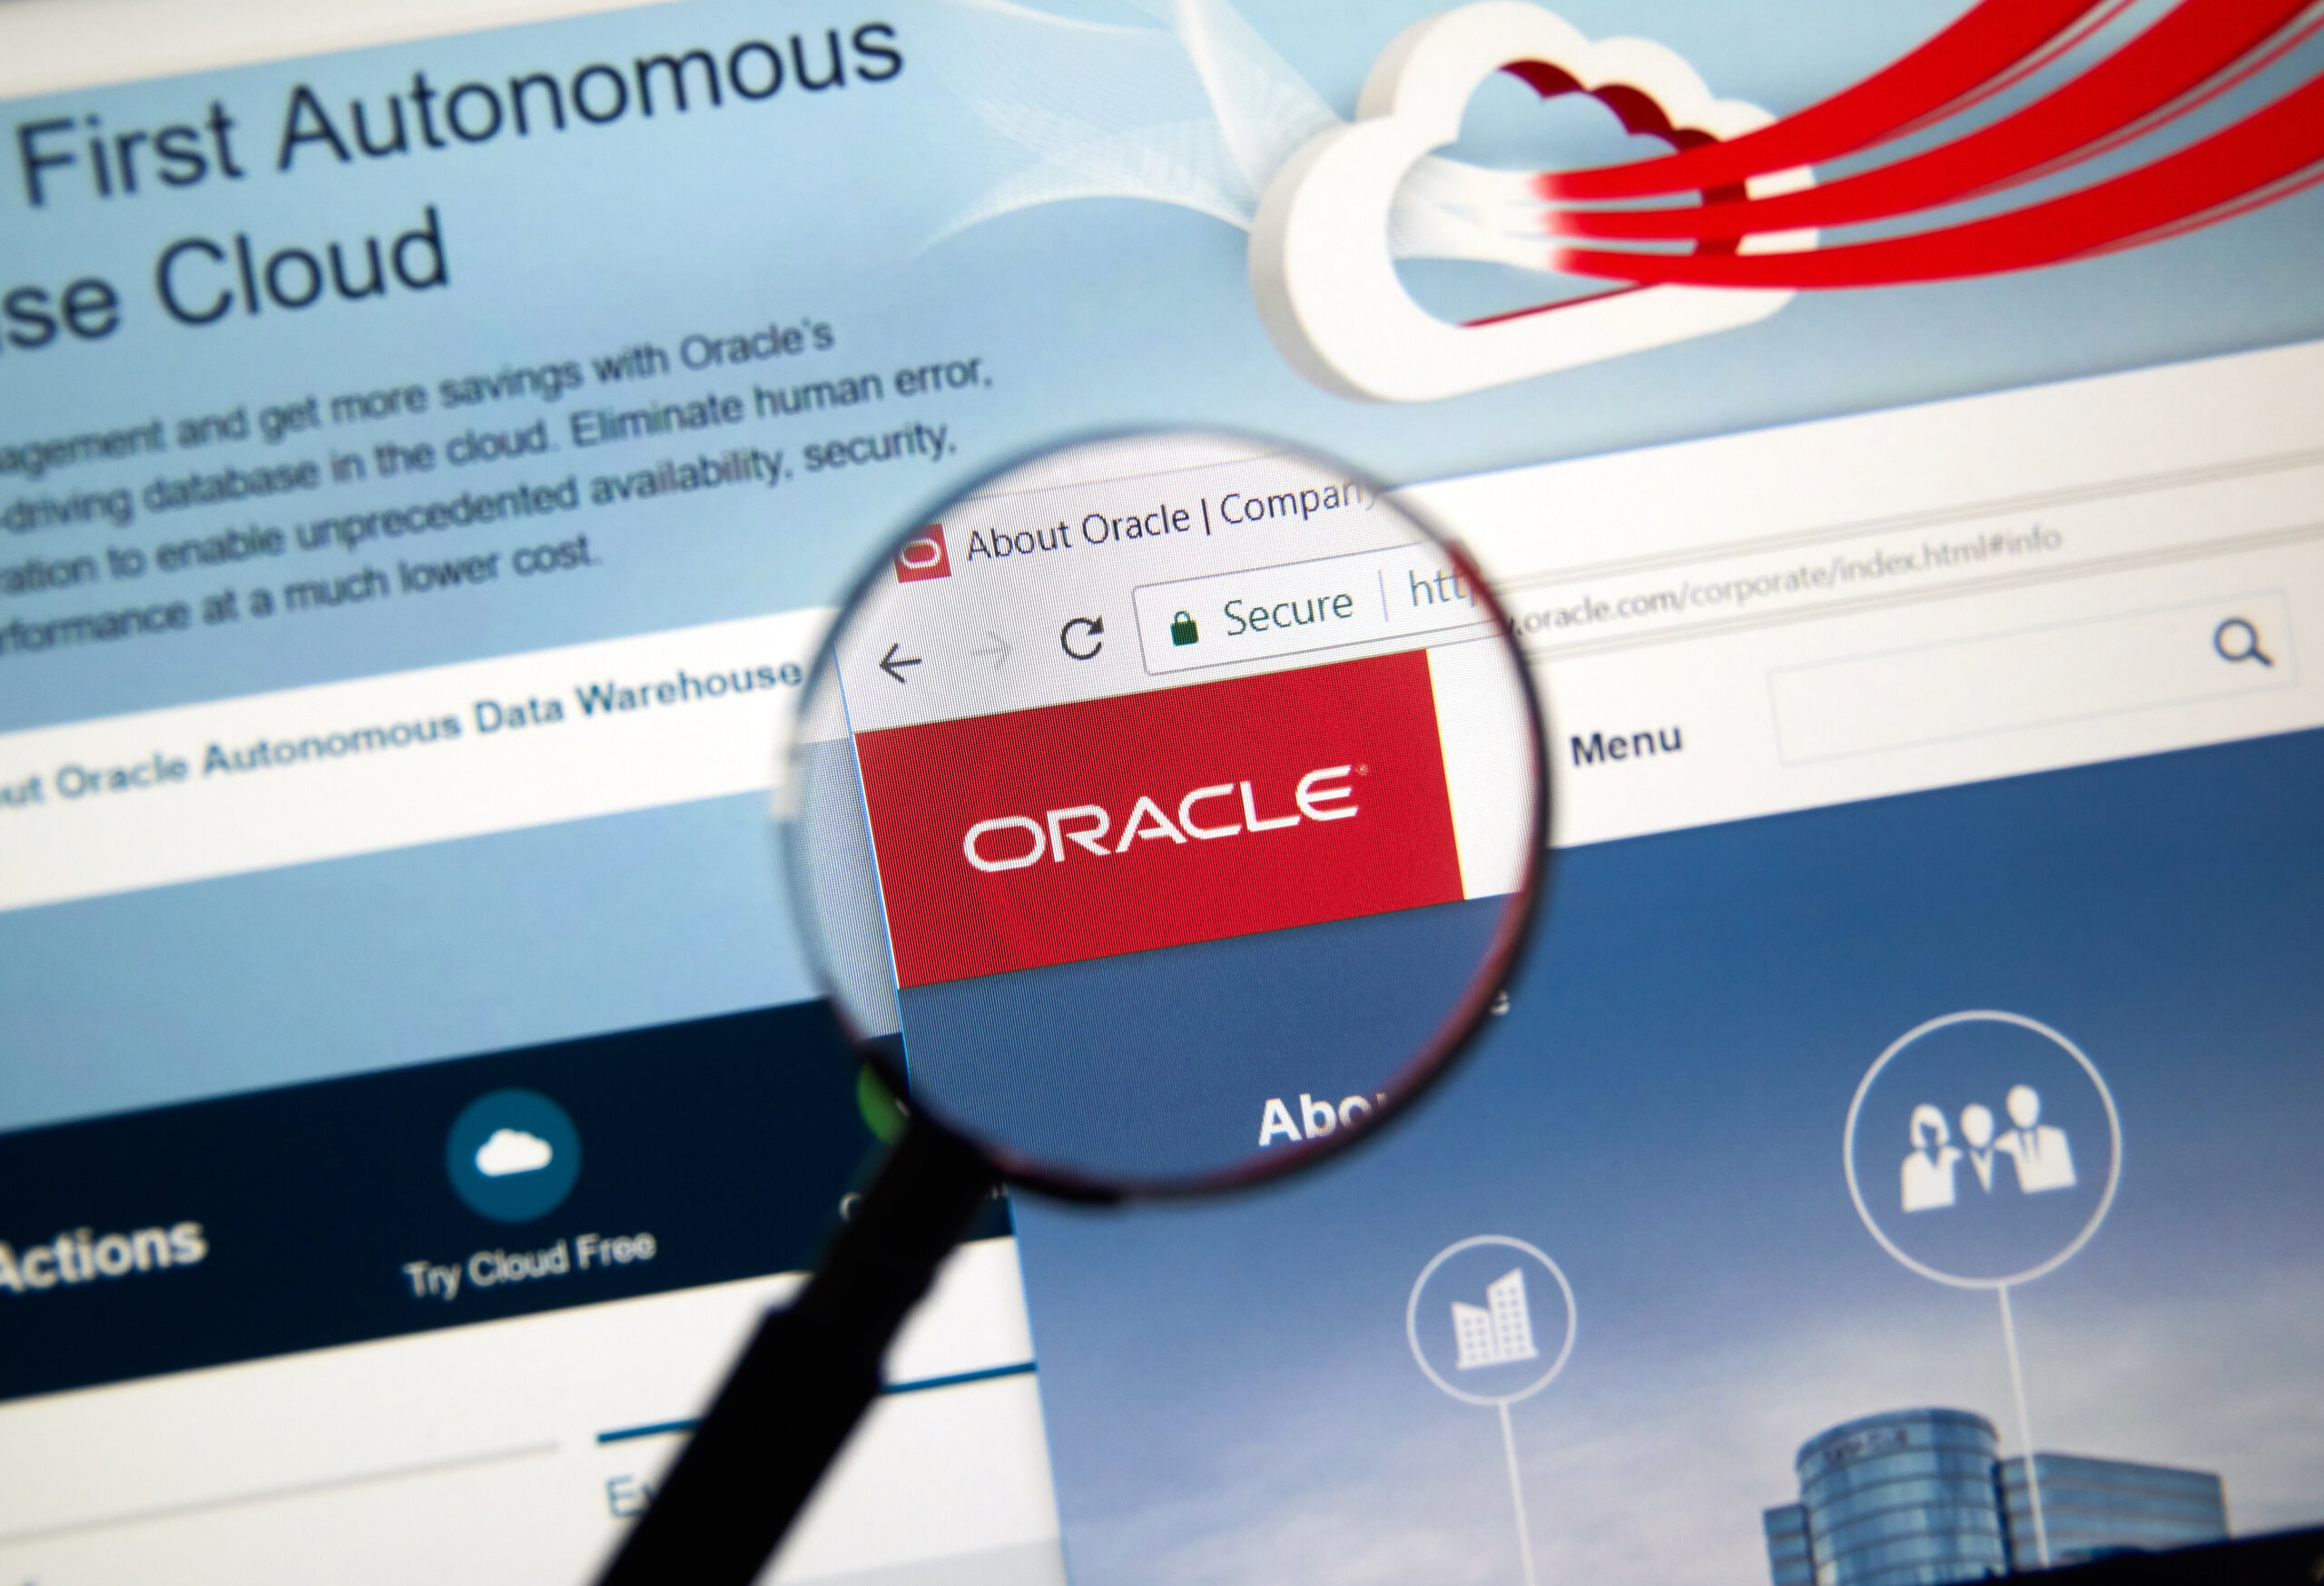 Gartner finds that Java licensing changes by Oracle are two to five times more expensive for most organizations.